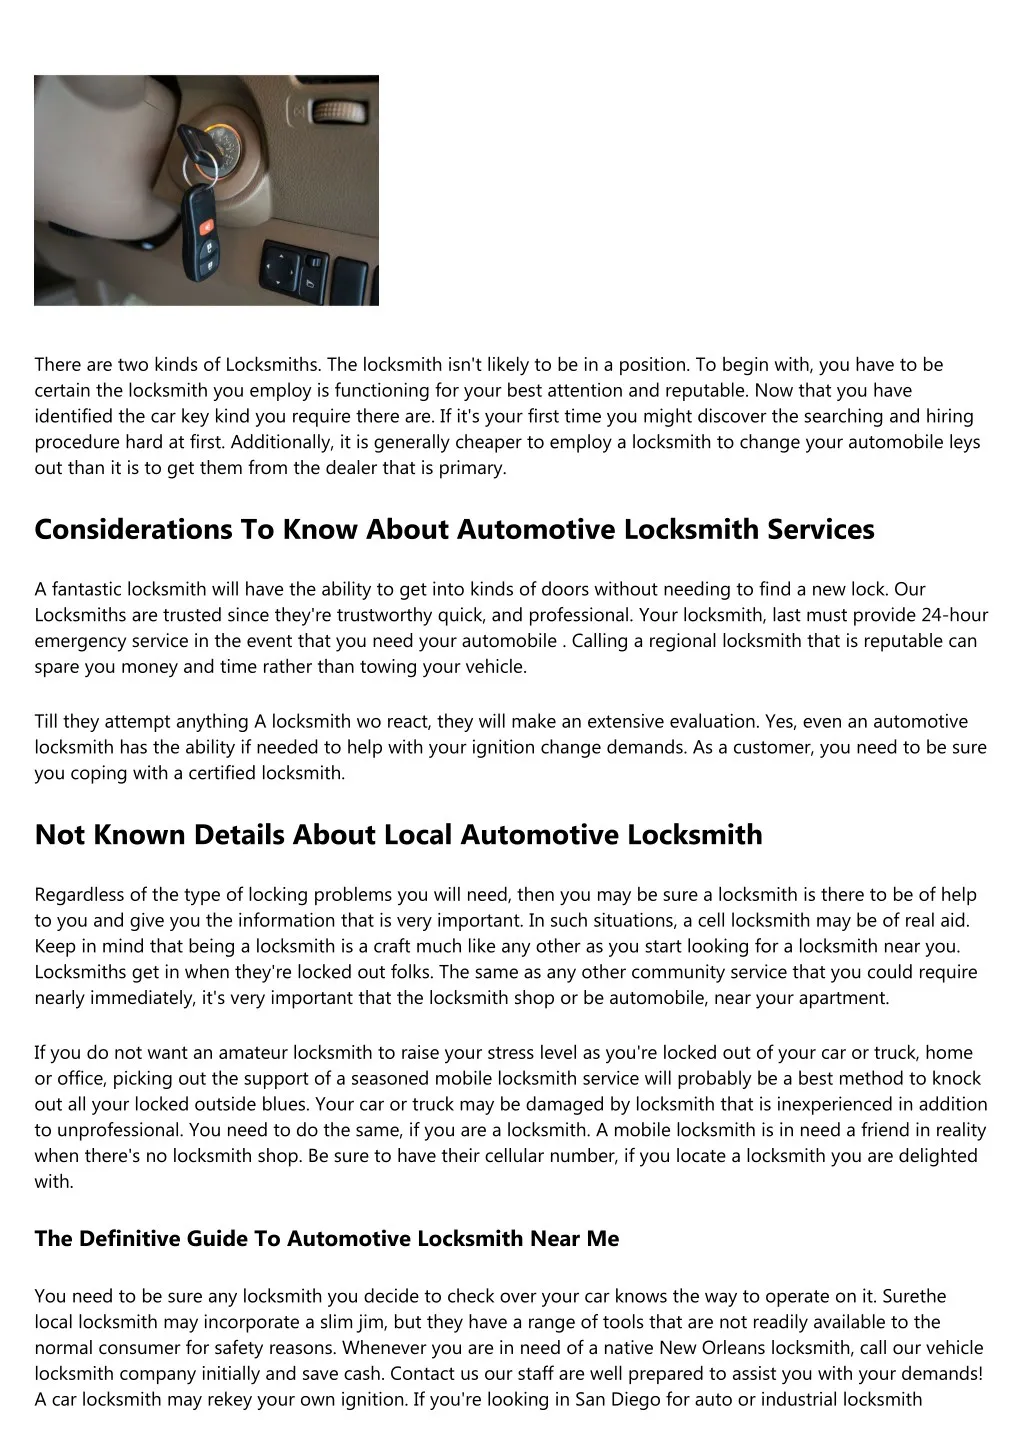 there are two kinds of locksmiths the locksmith n.